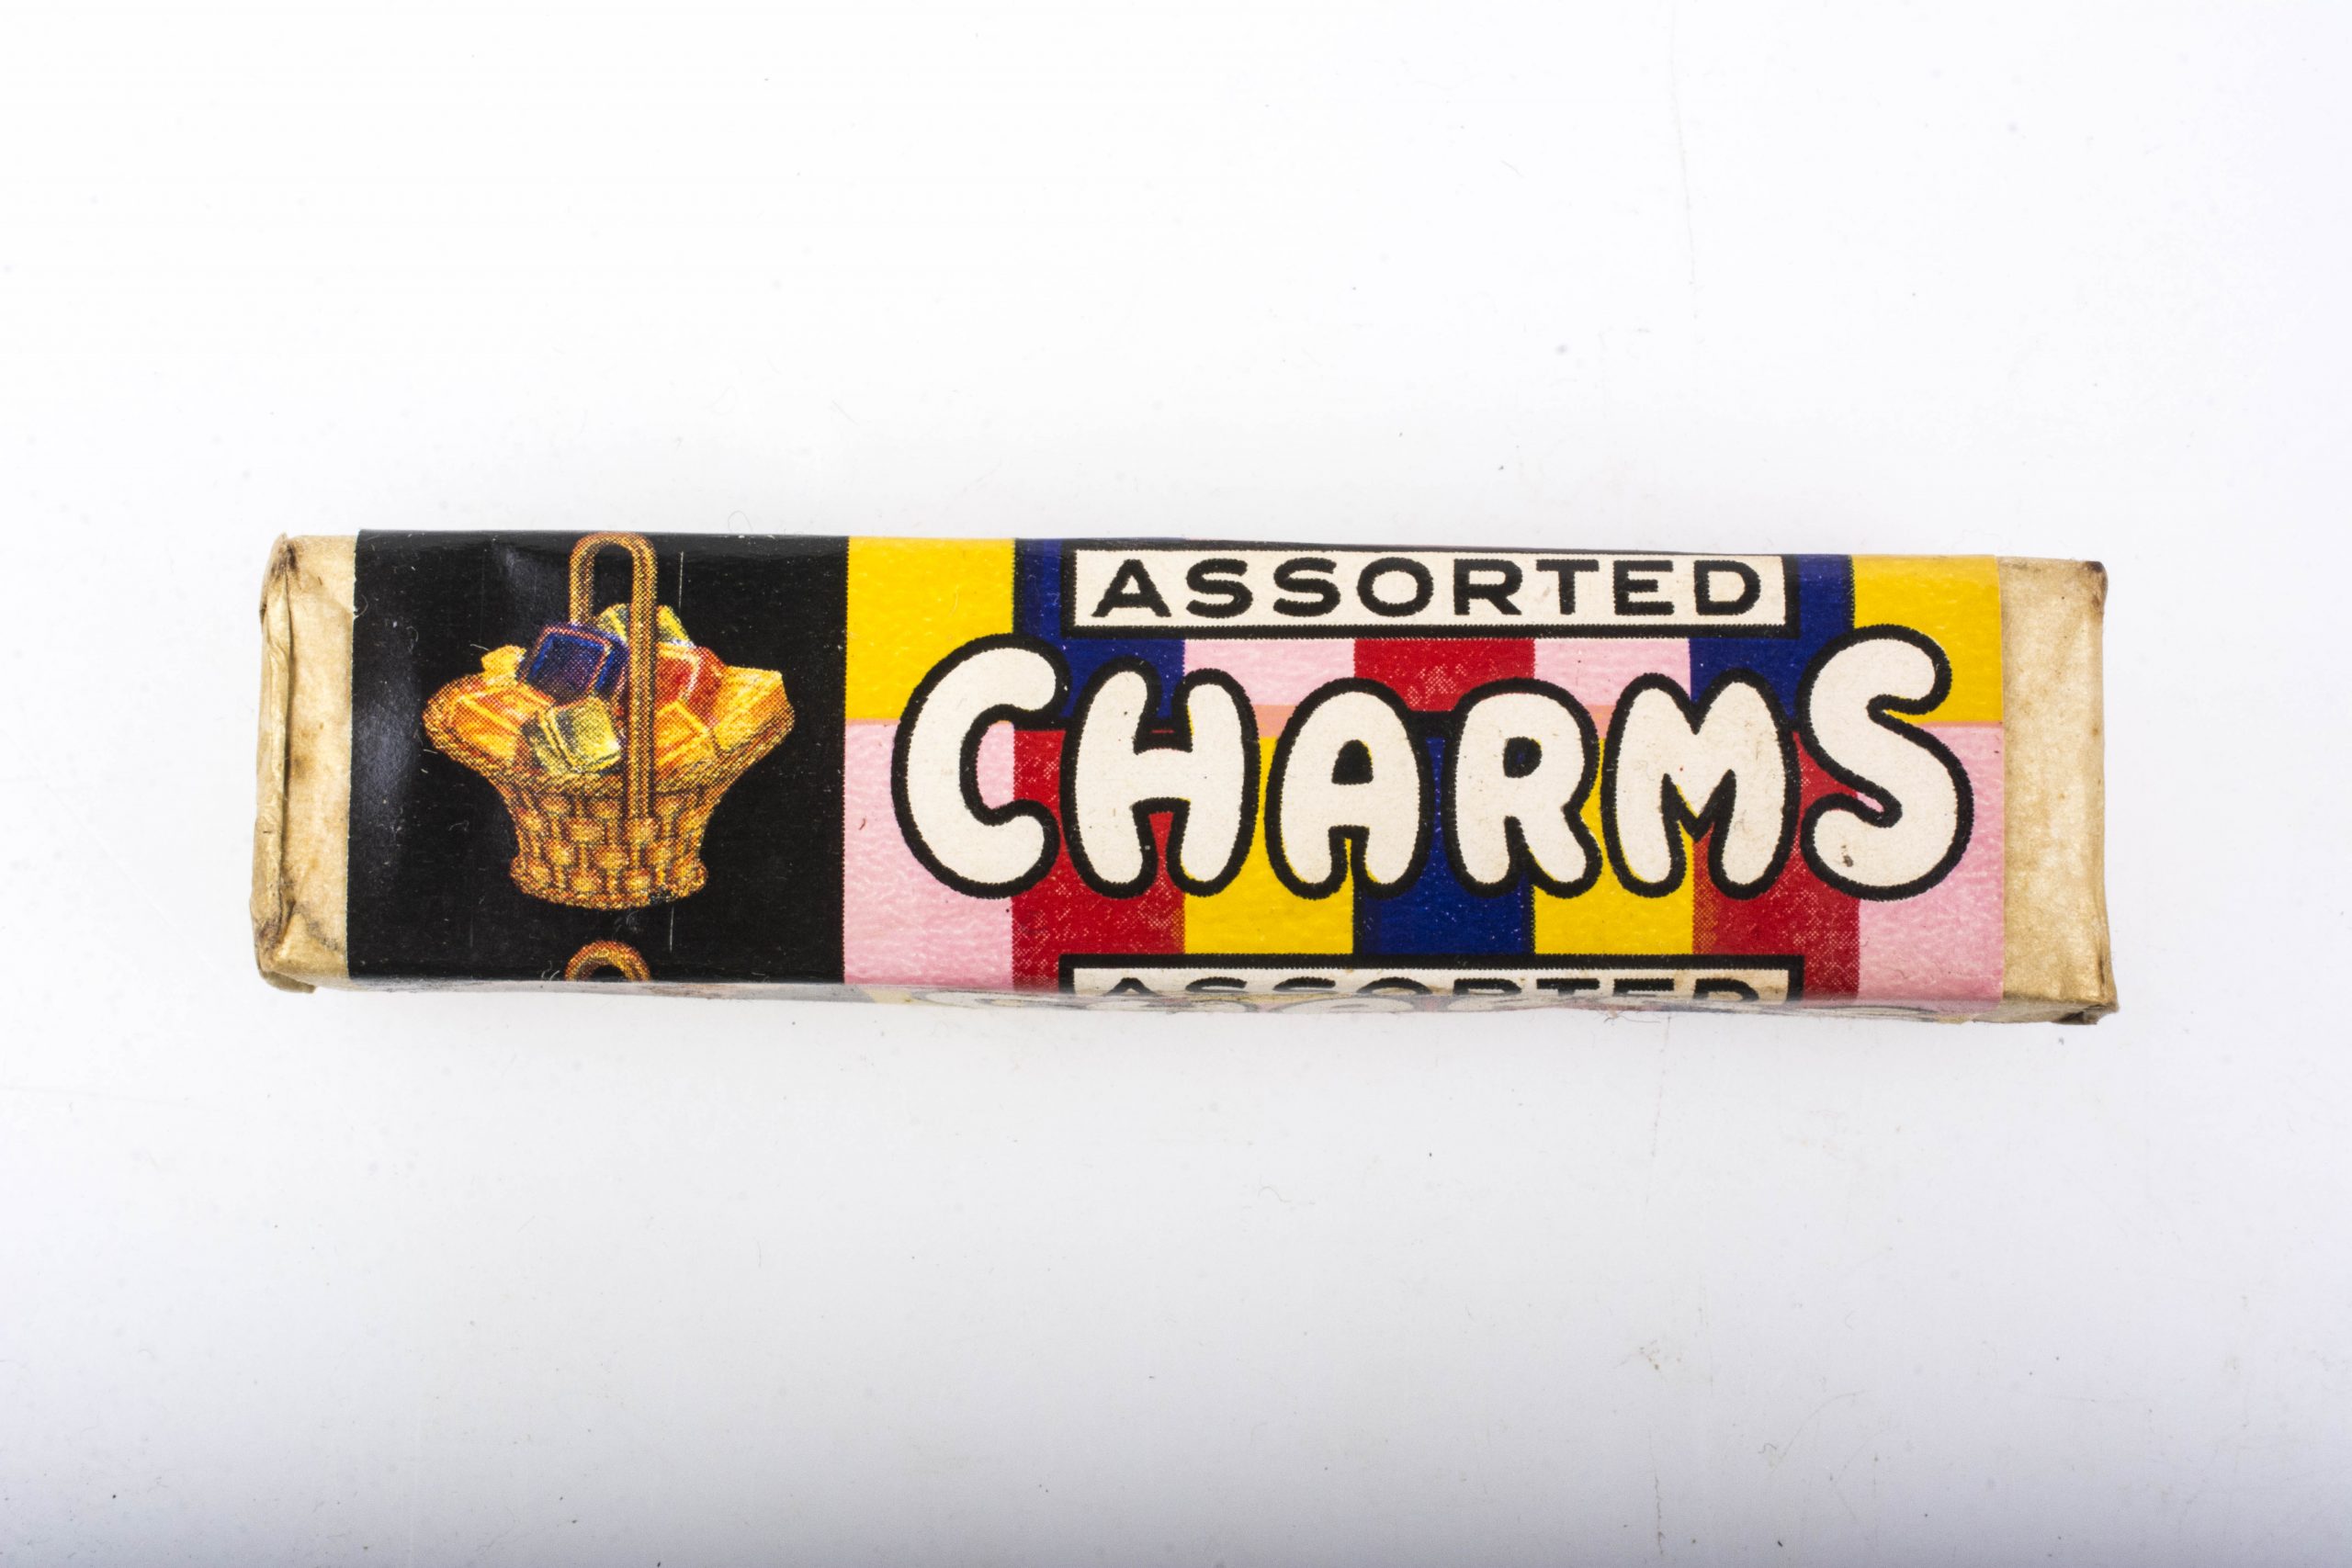 US Charms candy – fjm44